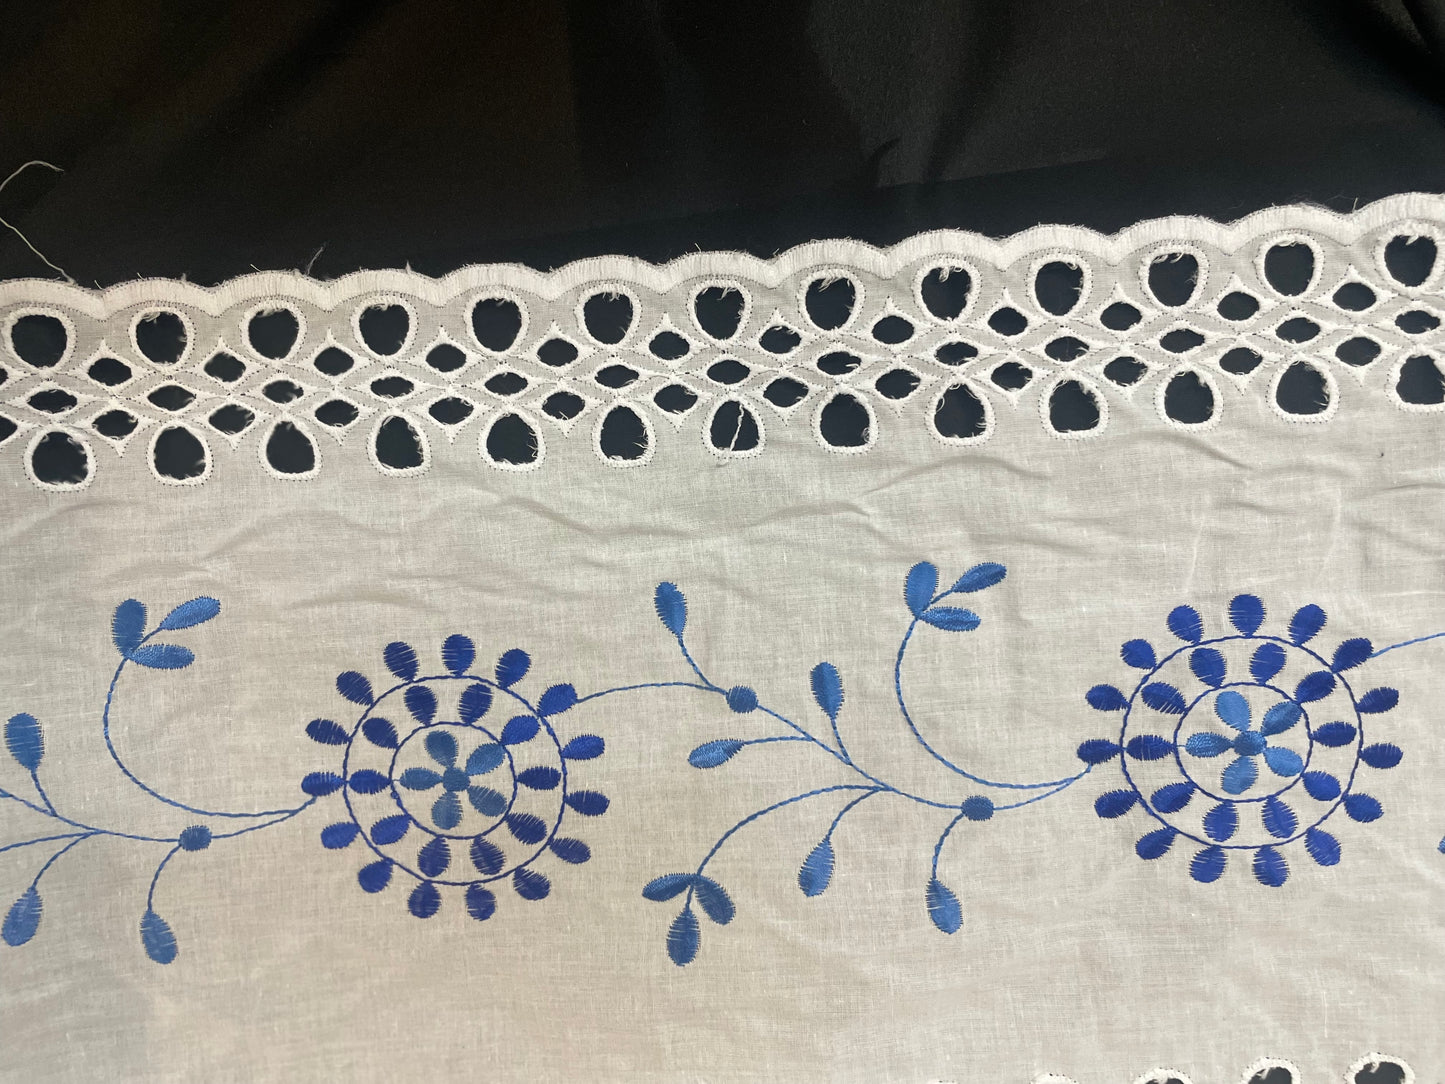 Eyelet & Floral Embroidered Cotton - White & Blue